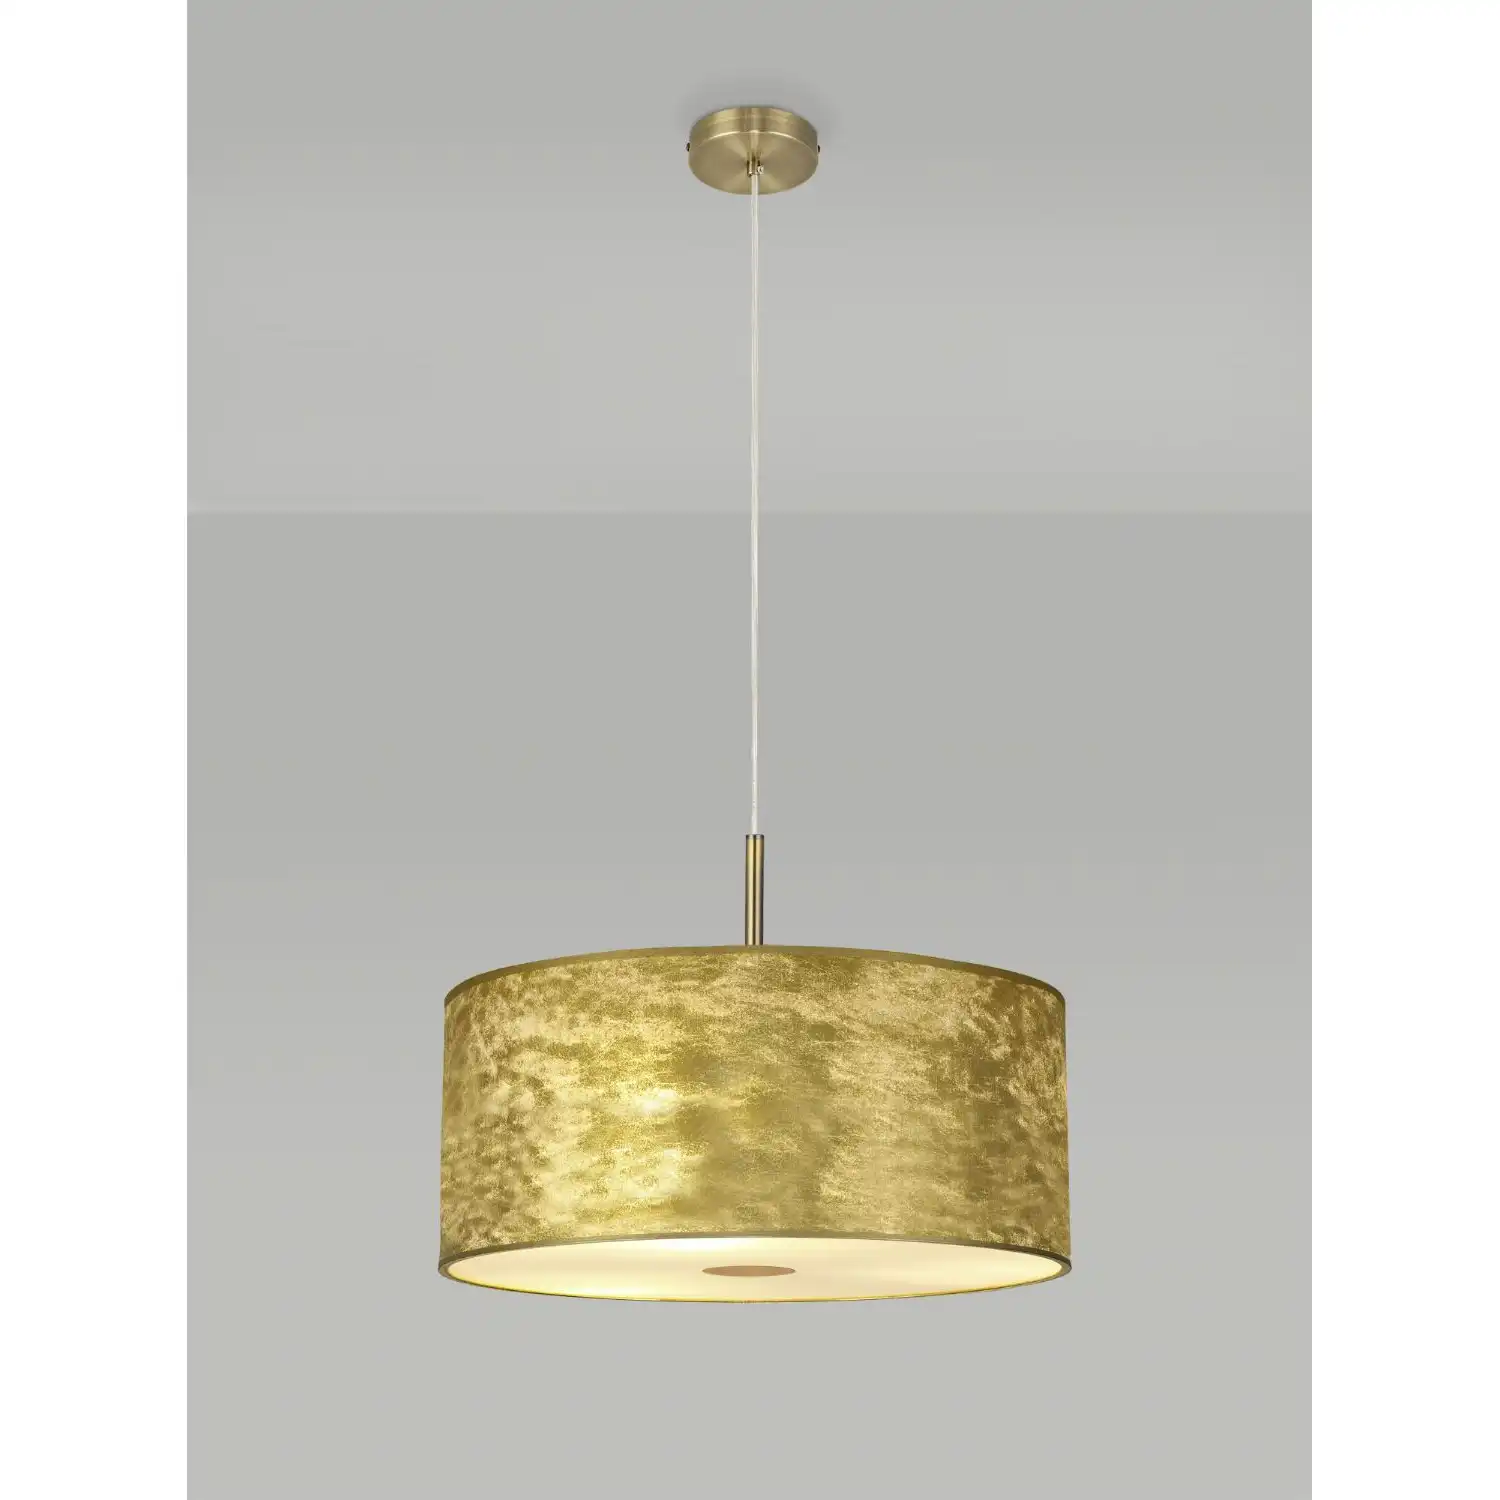 Baymont Antique Brass 3m 3 Light E27 Single Pendant With 500mm Gold Leaf Shade With Frosted Acrylic Diffuser With Antique Brass Centre